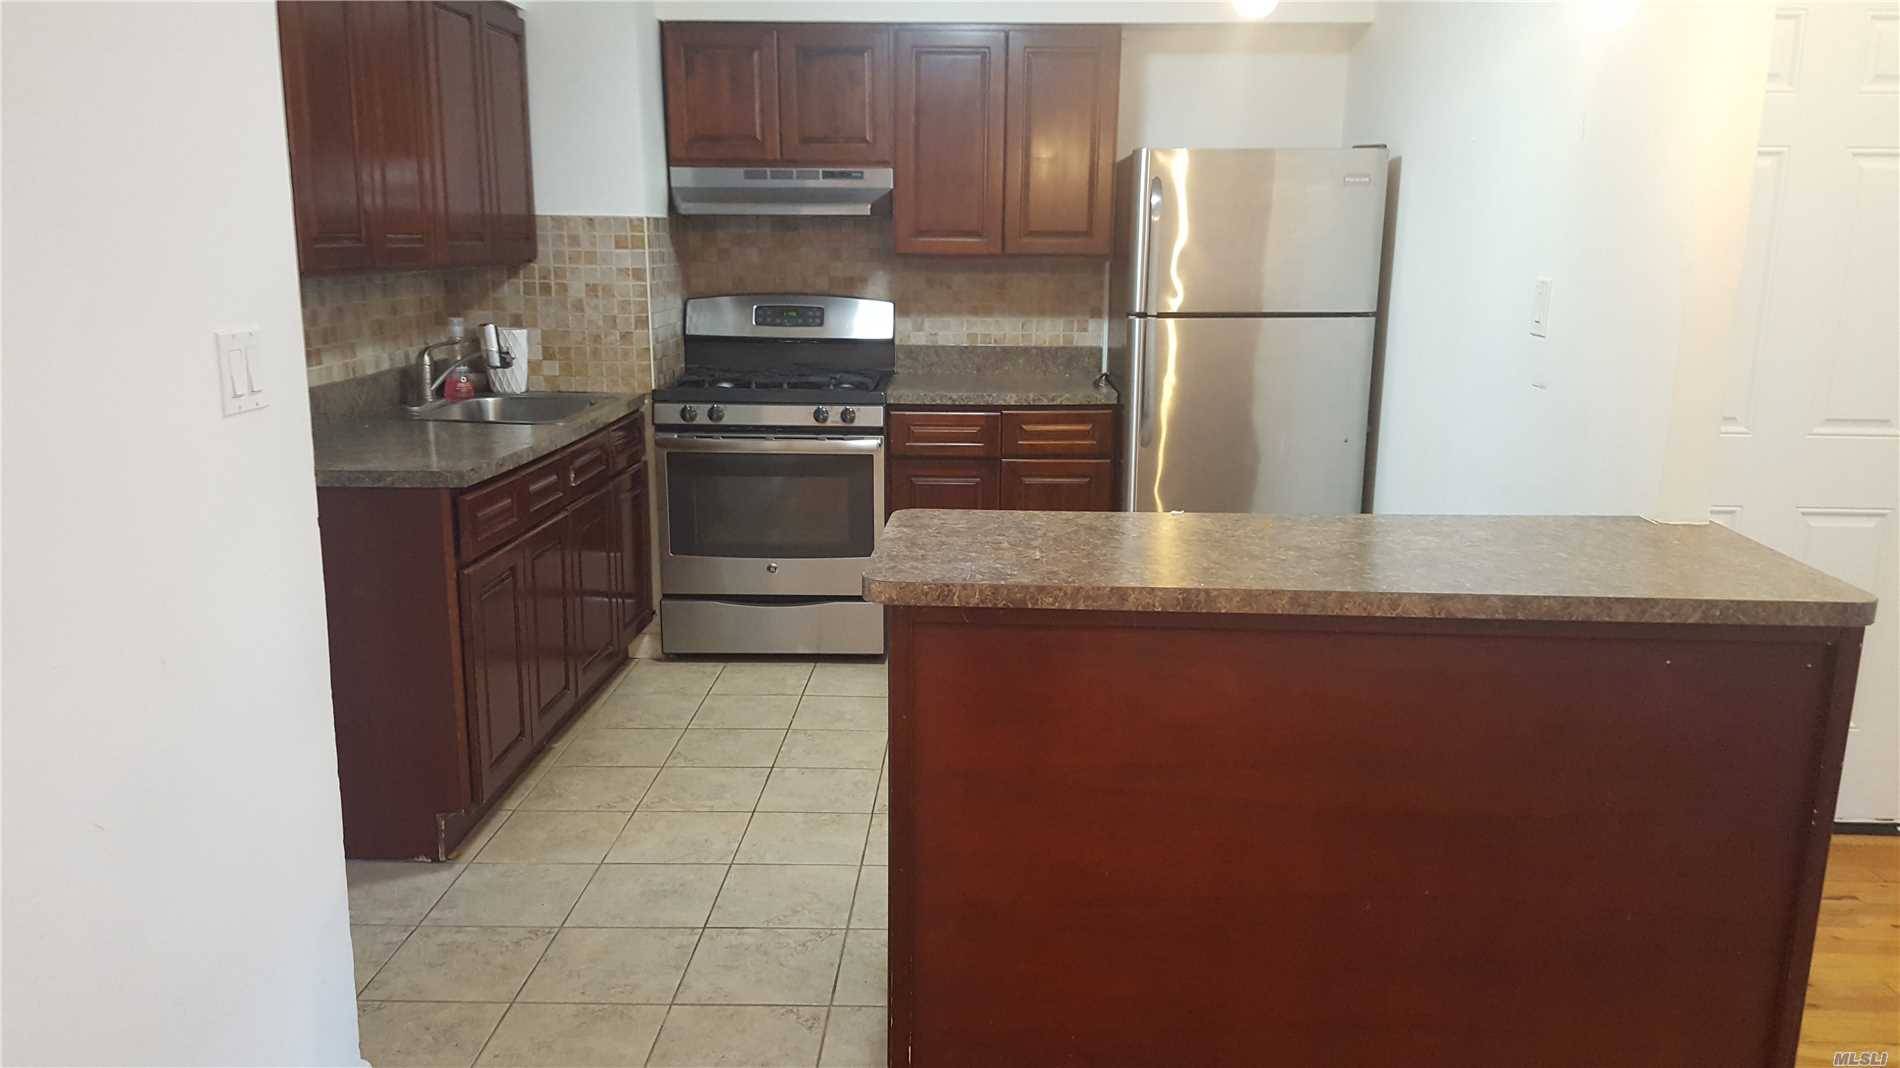 Right Next To Lirr ,Closer To Northern Blvd, Hardwood Floor Throughout,Great Location To All Heat And Parking Is Included.